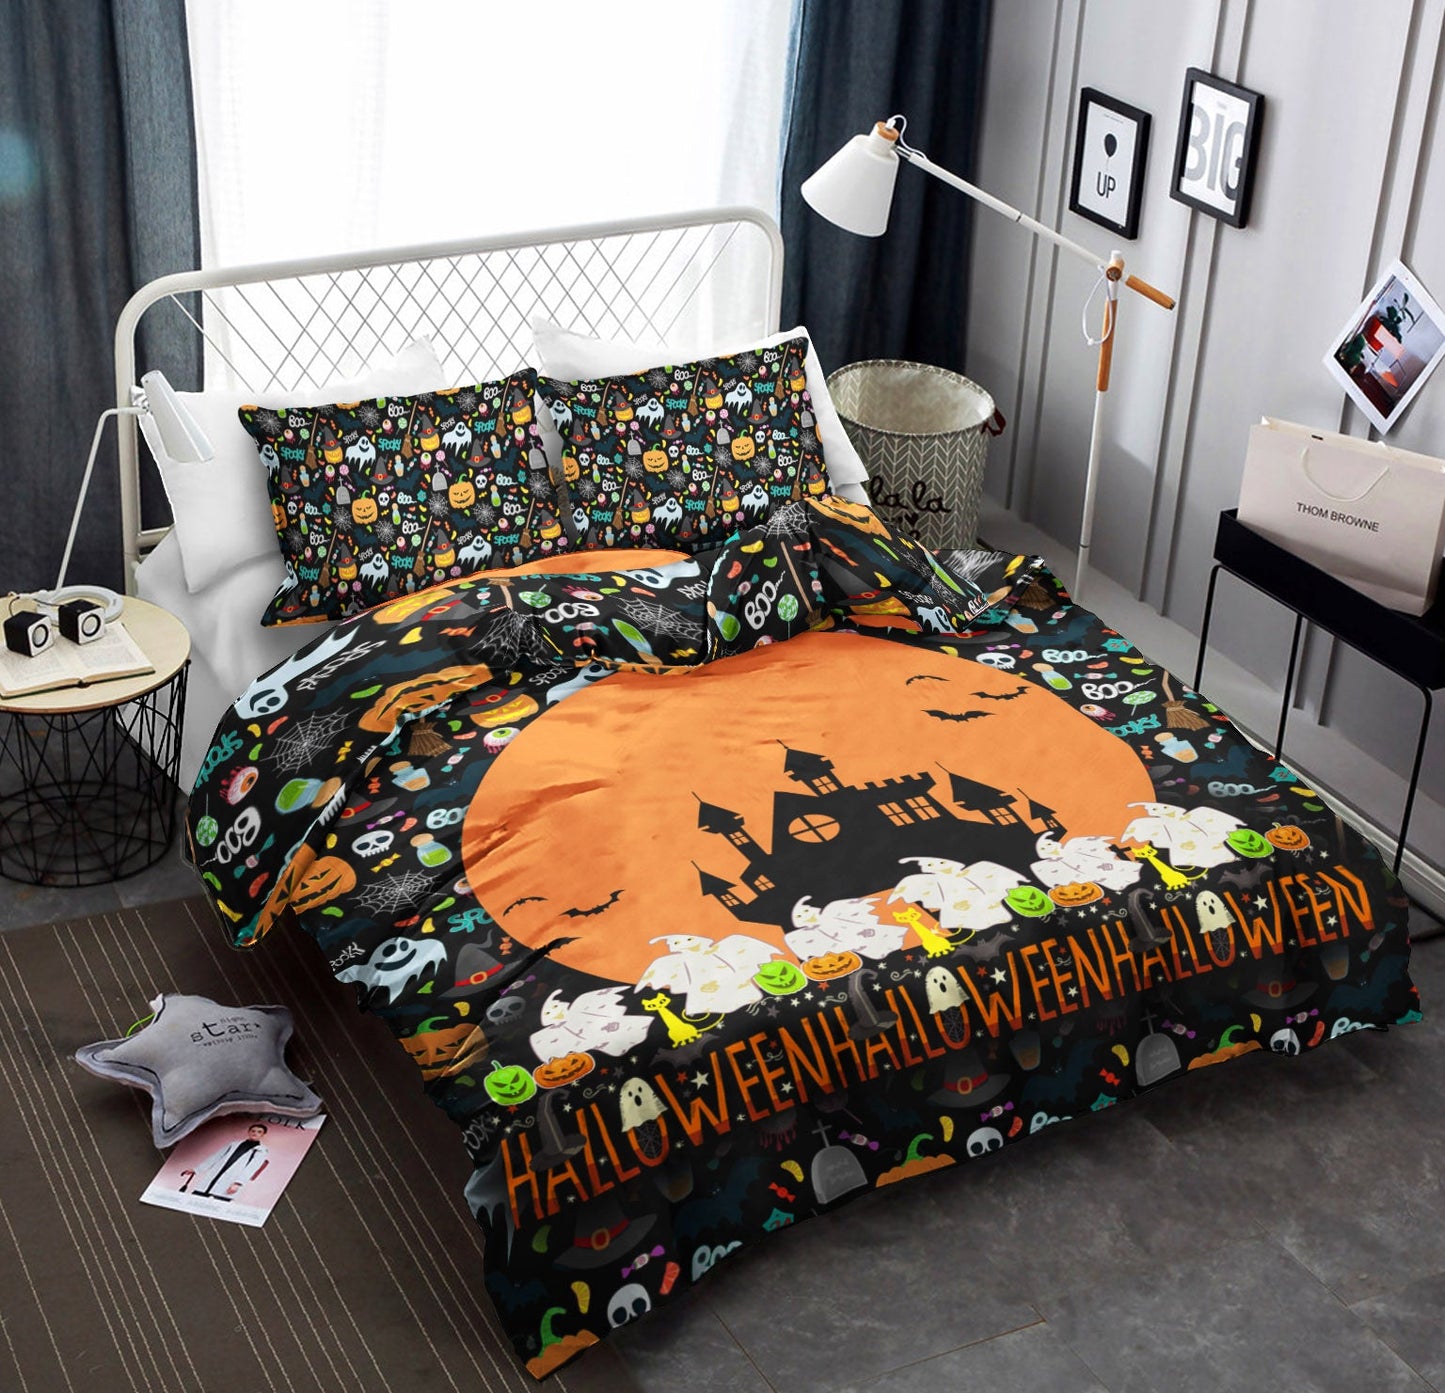 Halloween Haunted House CLM260841B Duvet Cover Bedding Sets